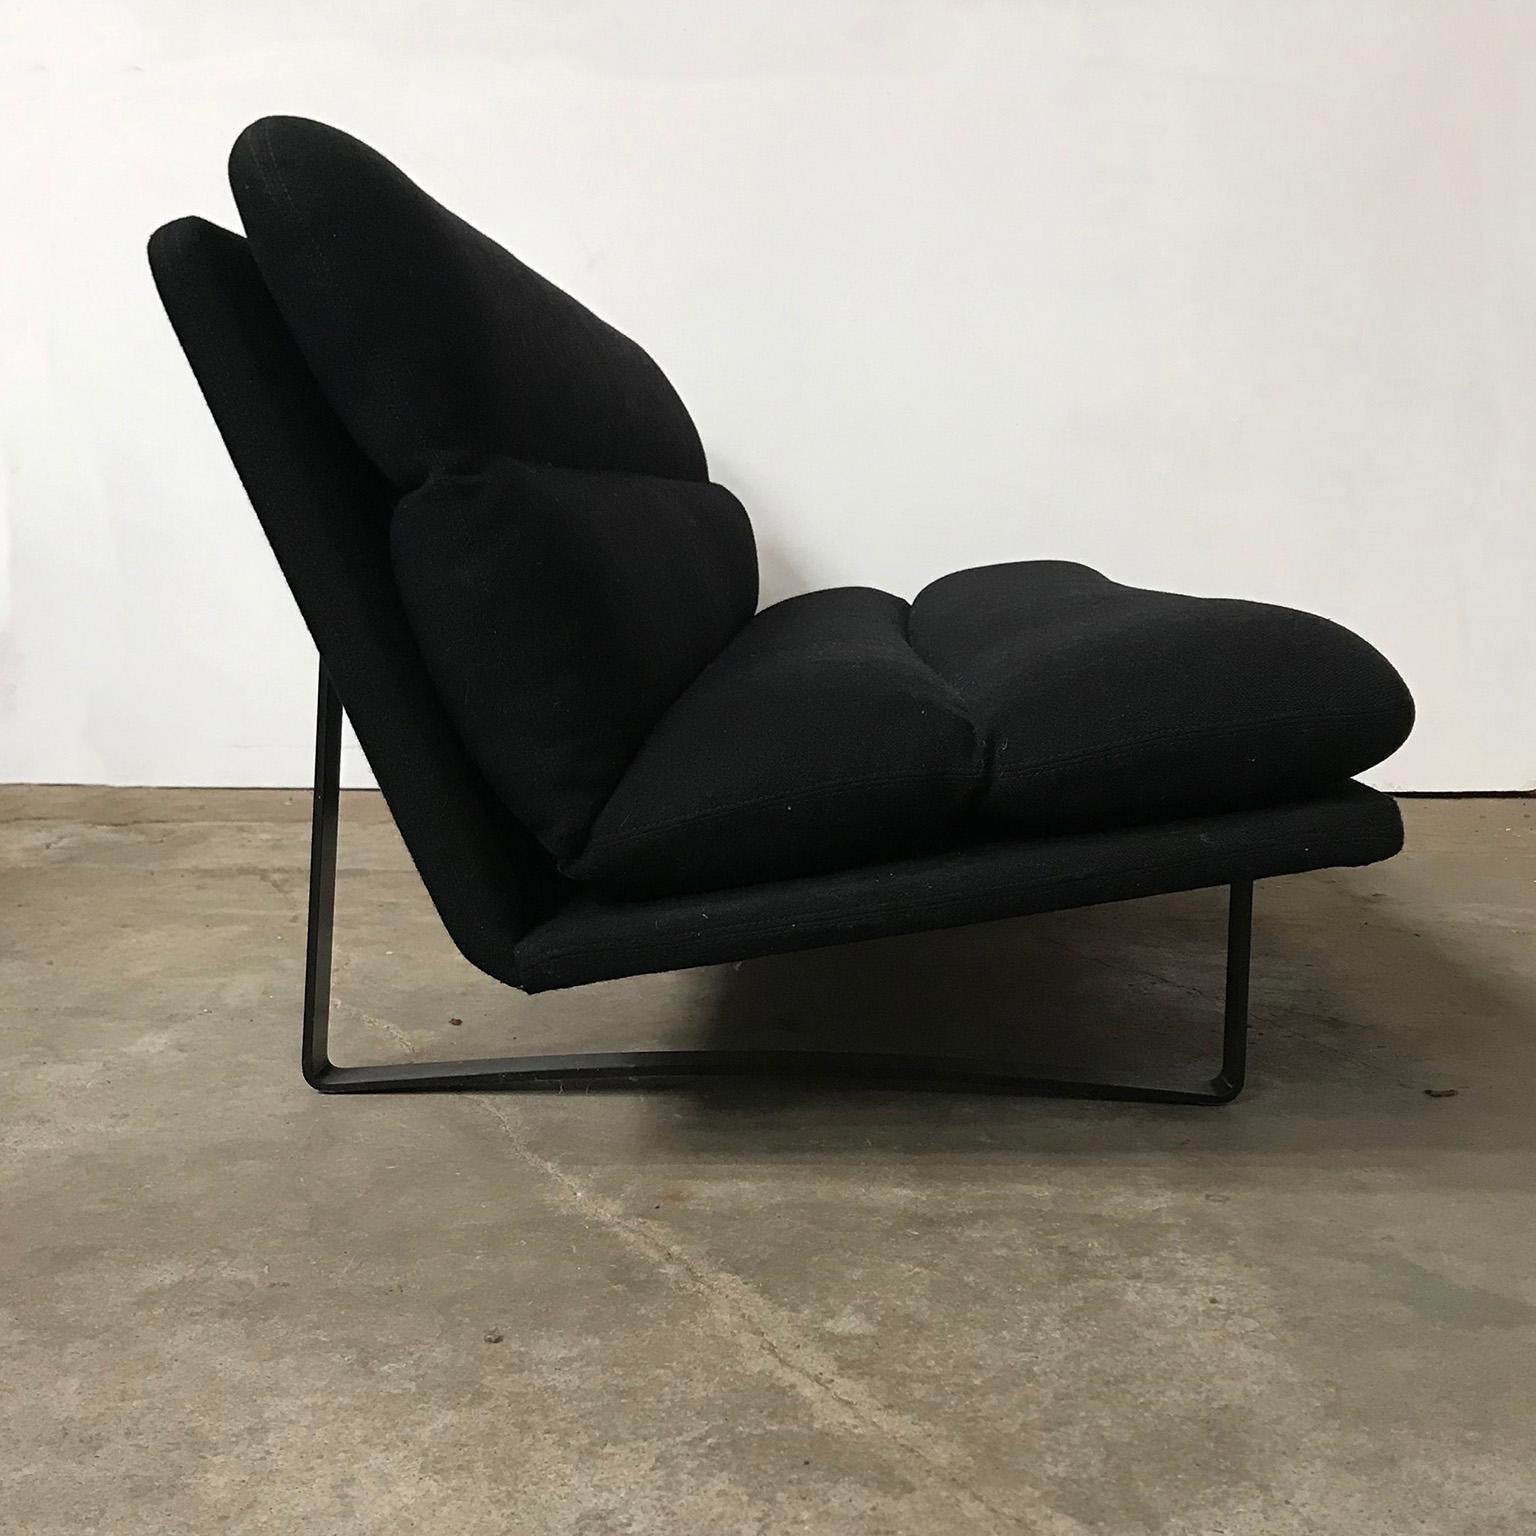 Original, early, stronger manufactured as nowadays, Kho Liang Ie 3-seat sofa in black fabric and black base. The upholstery shows traces of wear like some fading of color and some stains (#9) and some damage on one the corners (#13). The black base